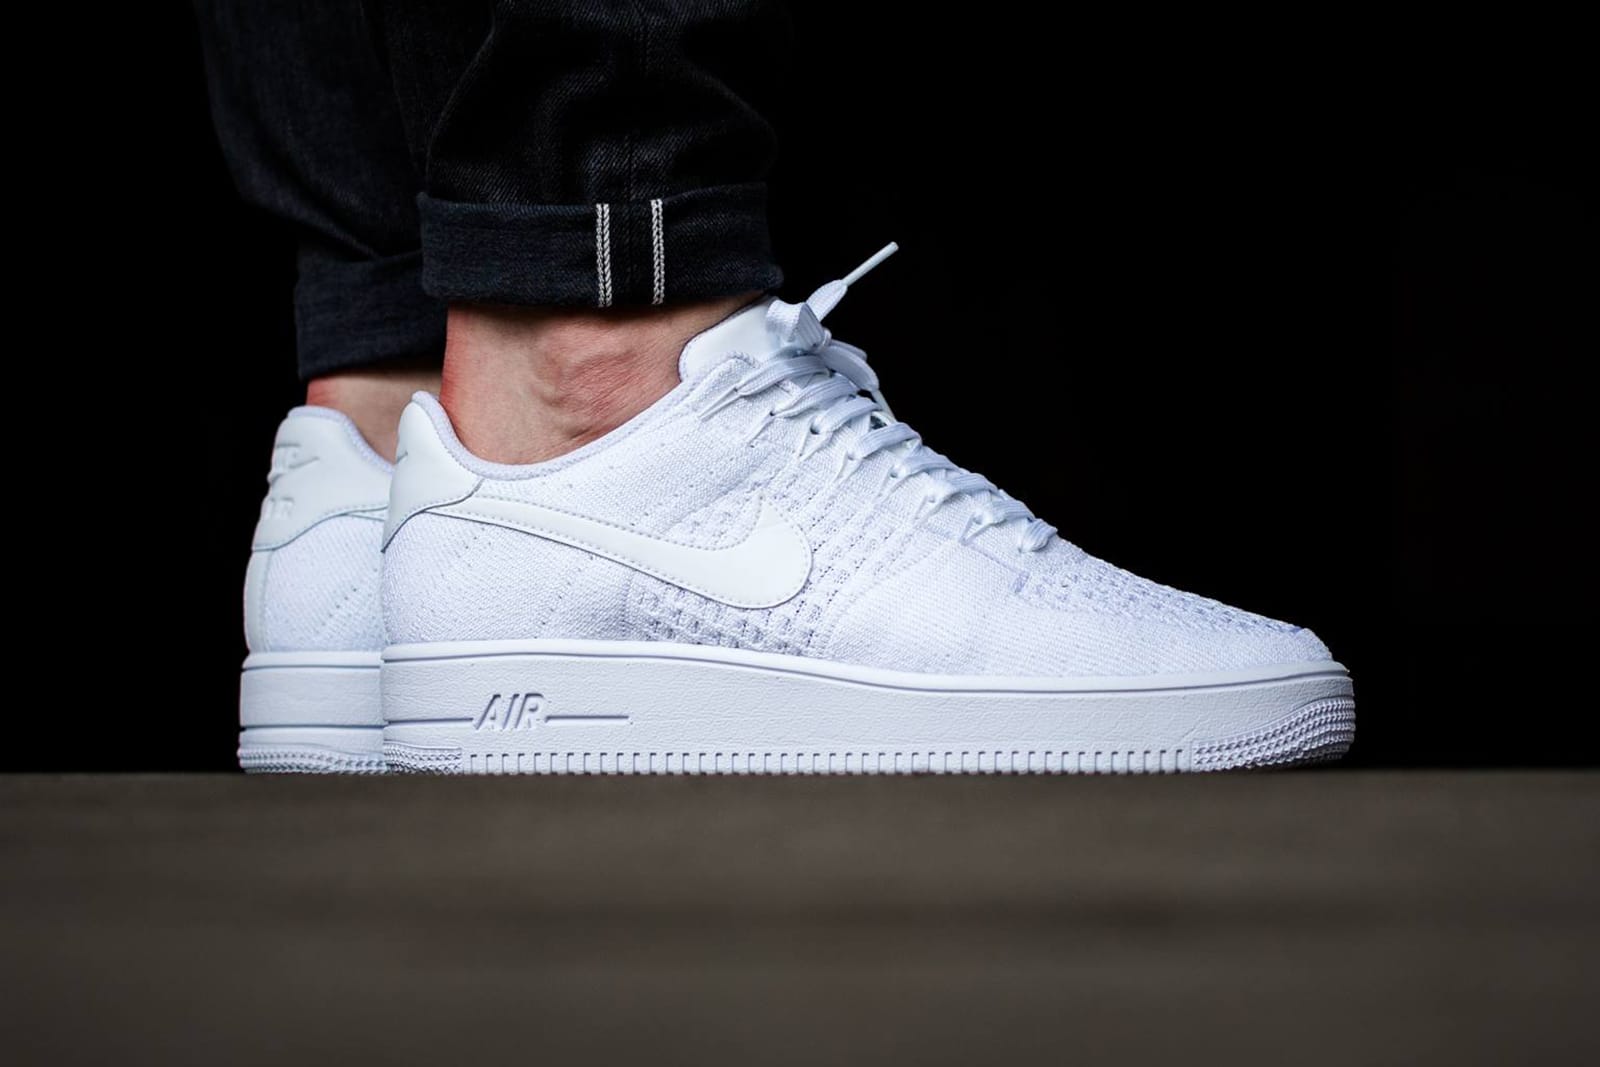 Nike Air Force 1 One Ultra Flyknit Low White